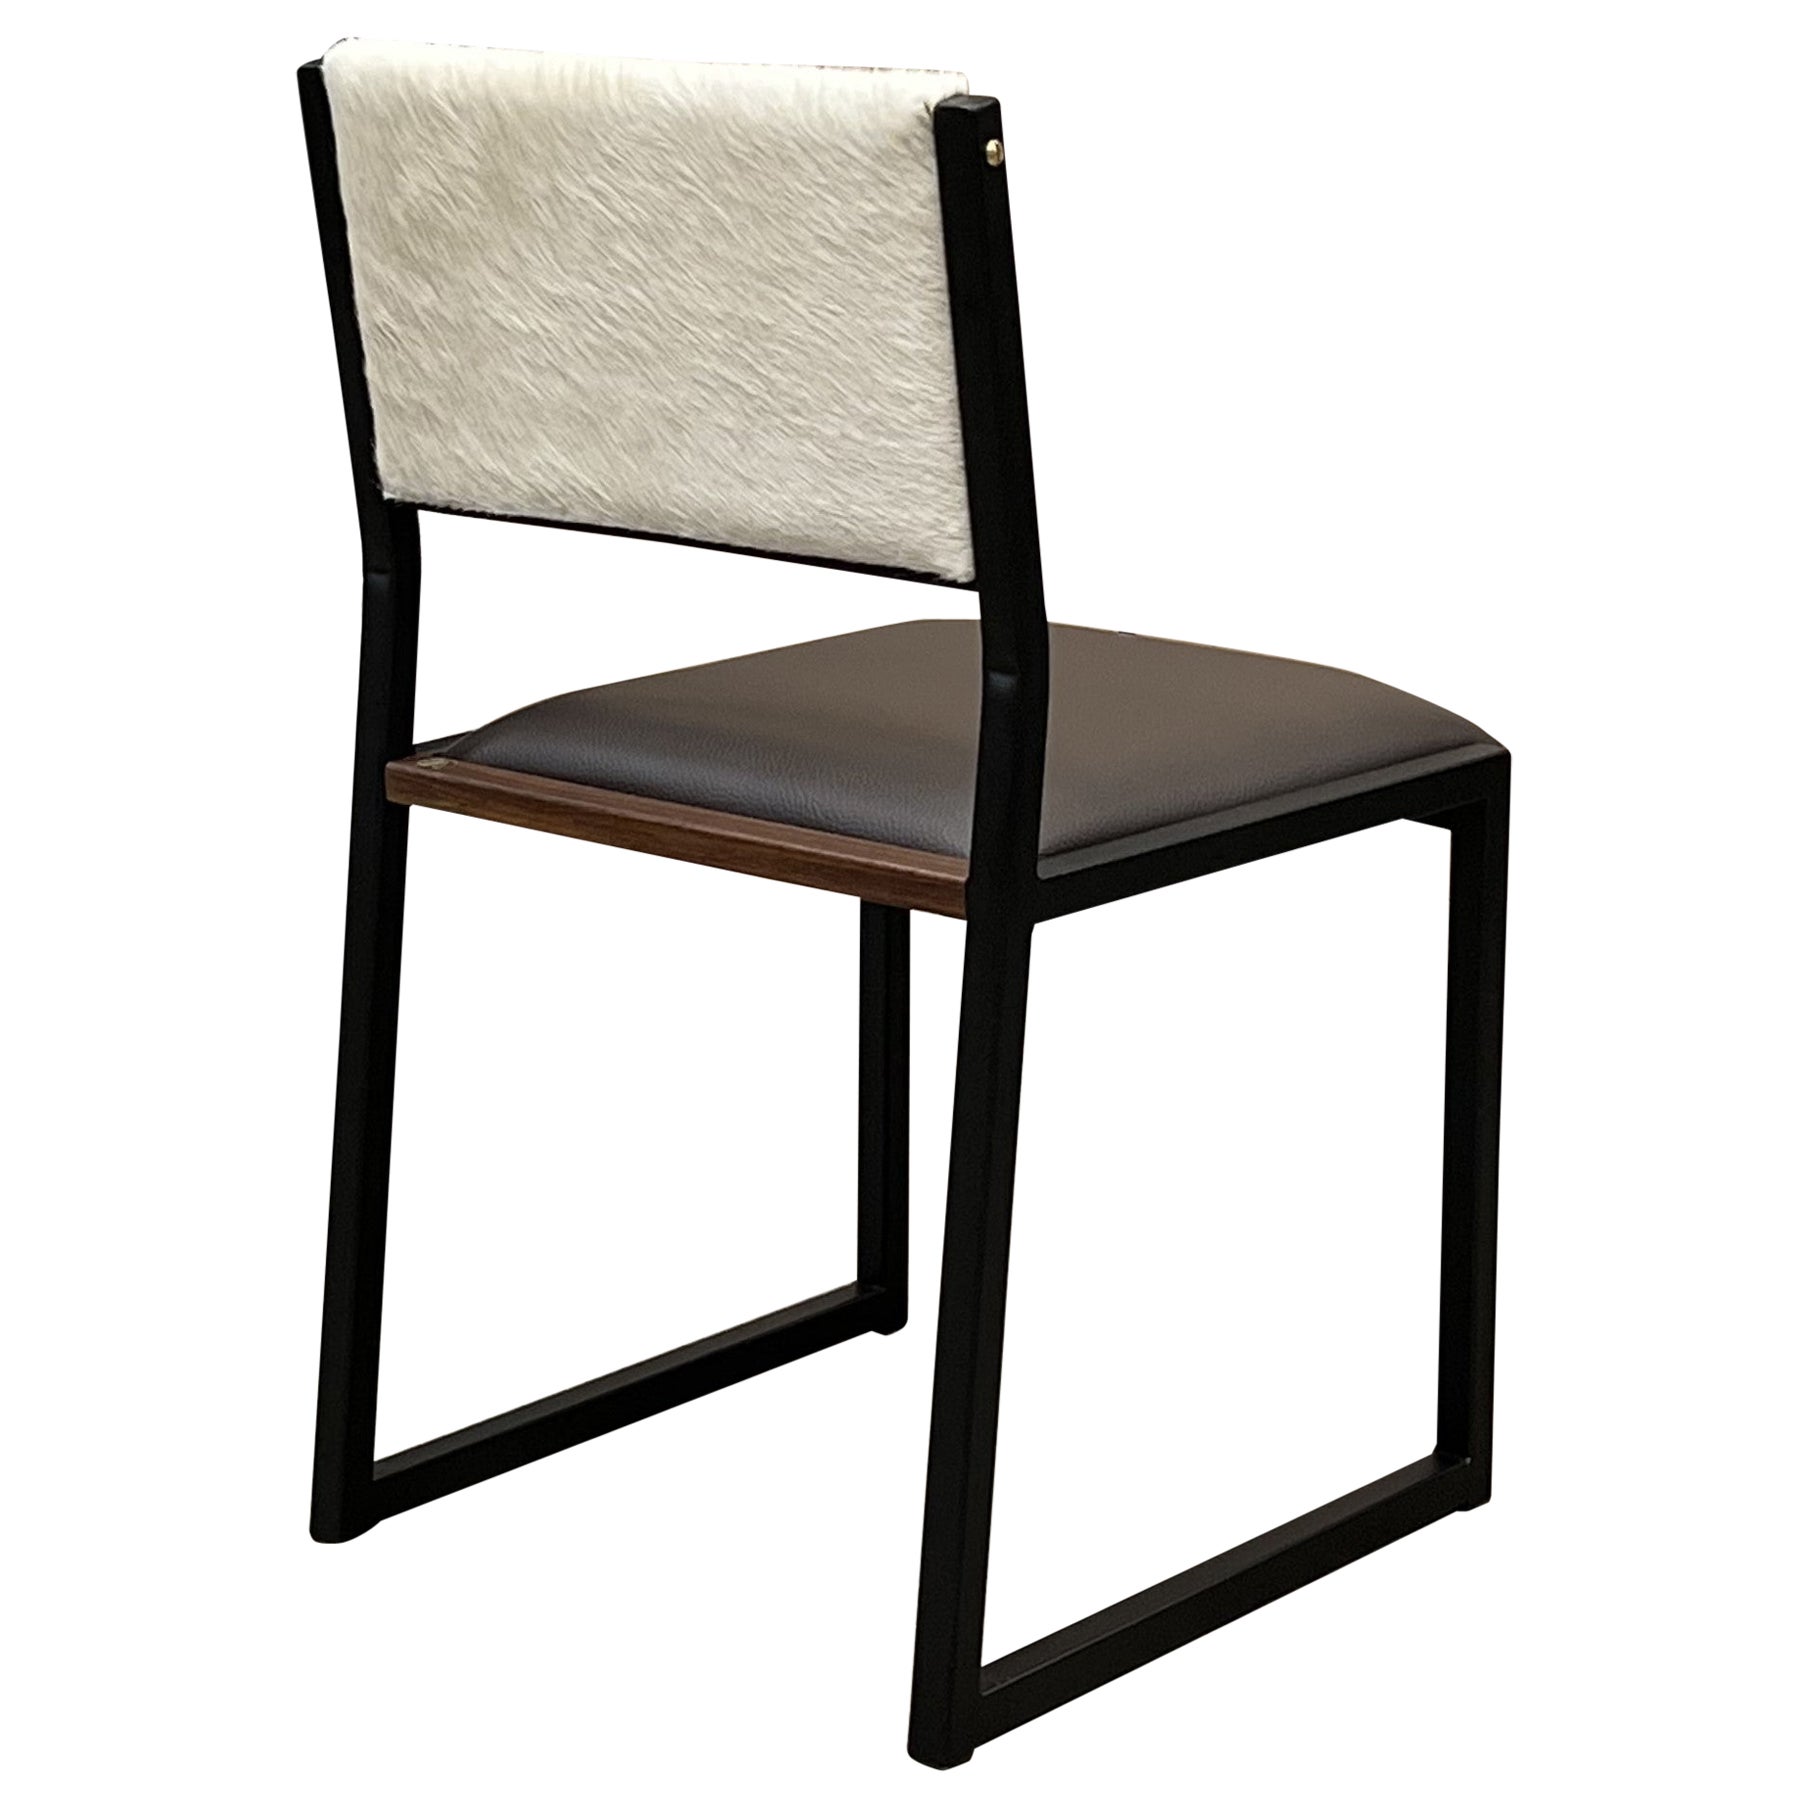 Shaker Modern Chair by Ambrozia, Walnut, Dark Brown Leather, White Cowhide For Sale